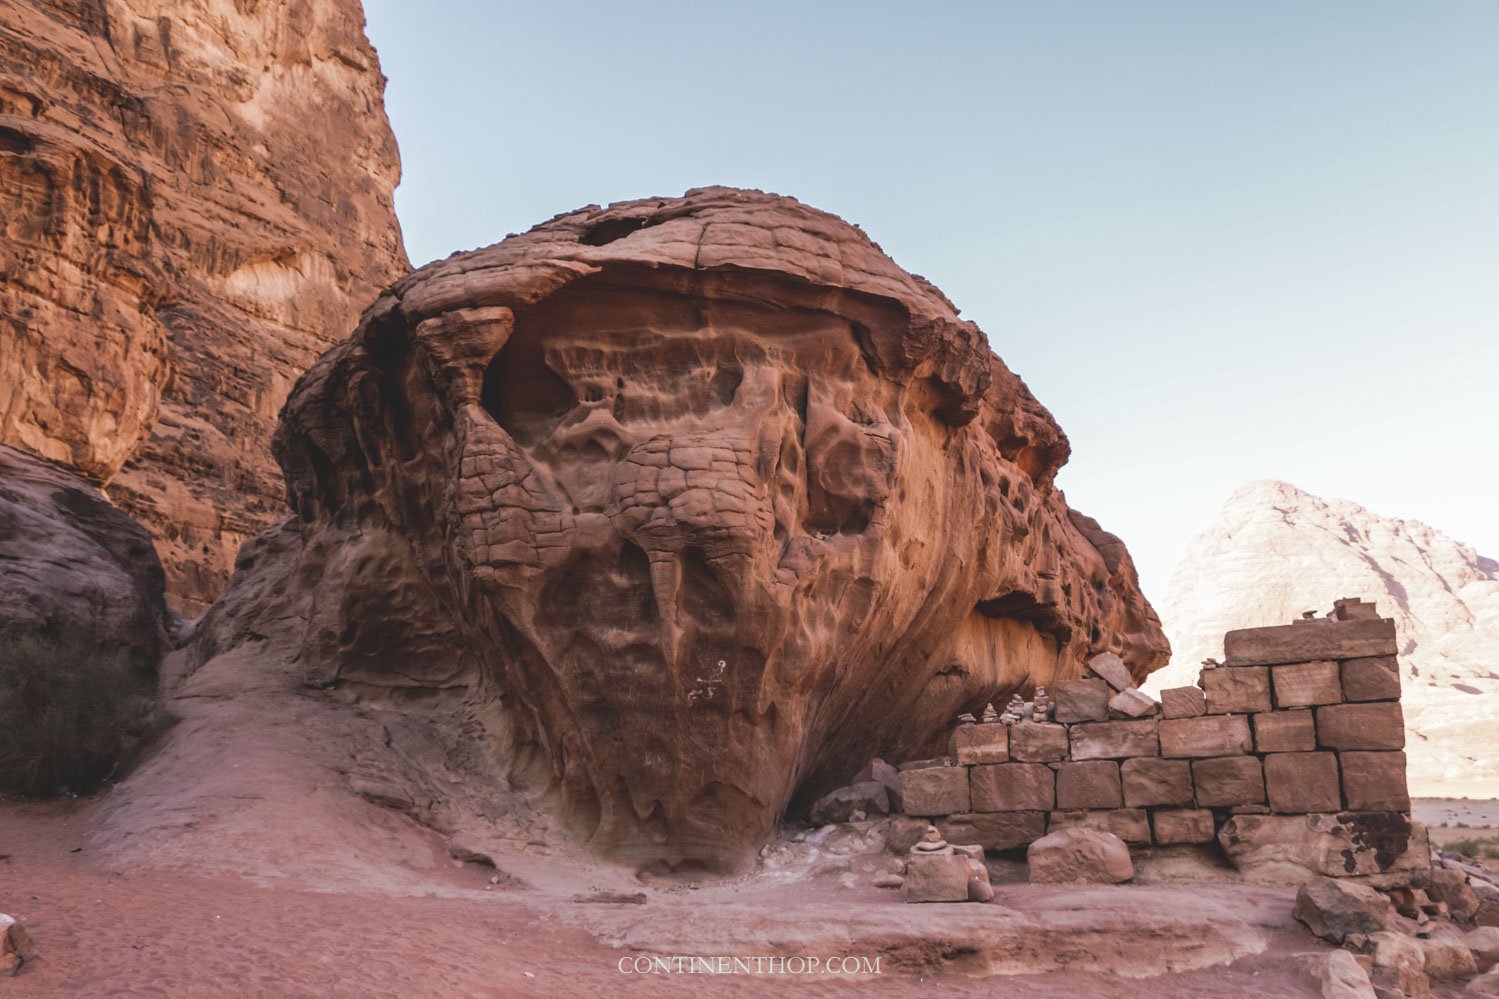 Things to do in Wadi Rum - visit Lawrence house